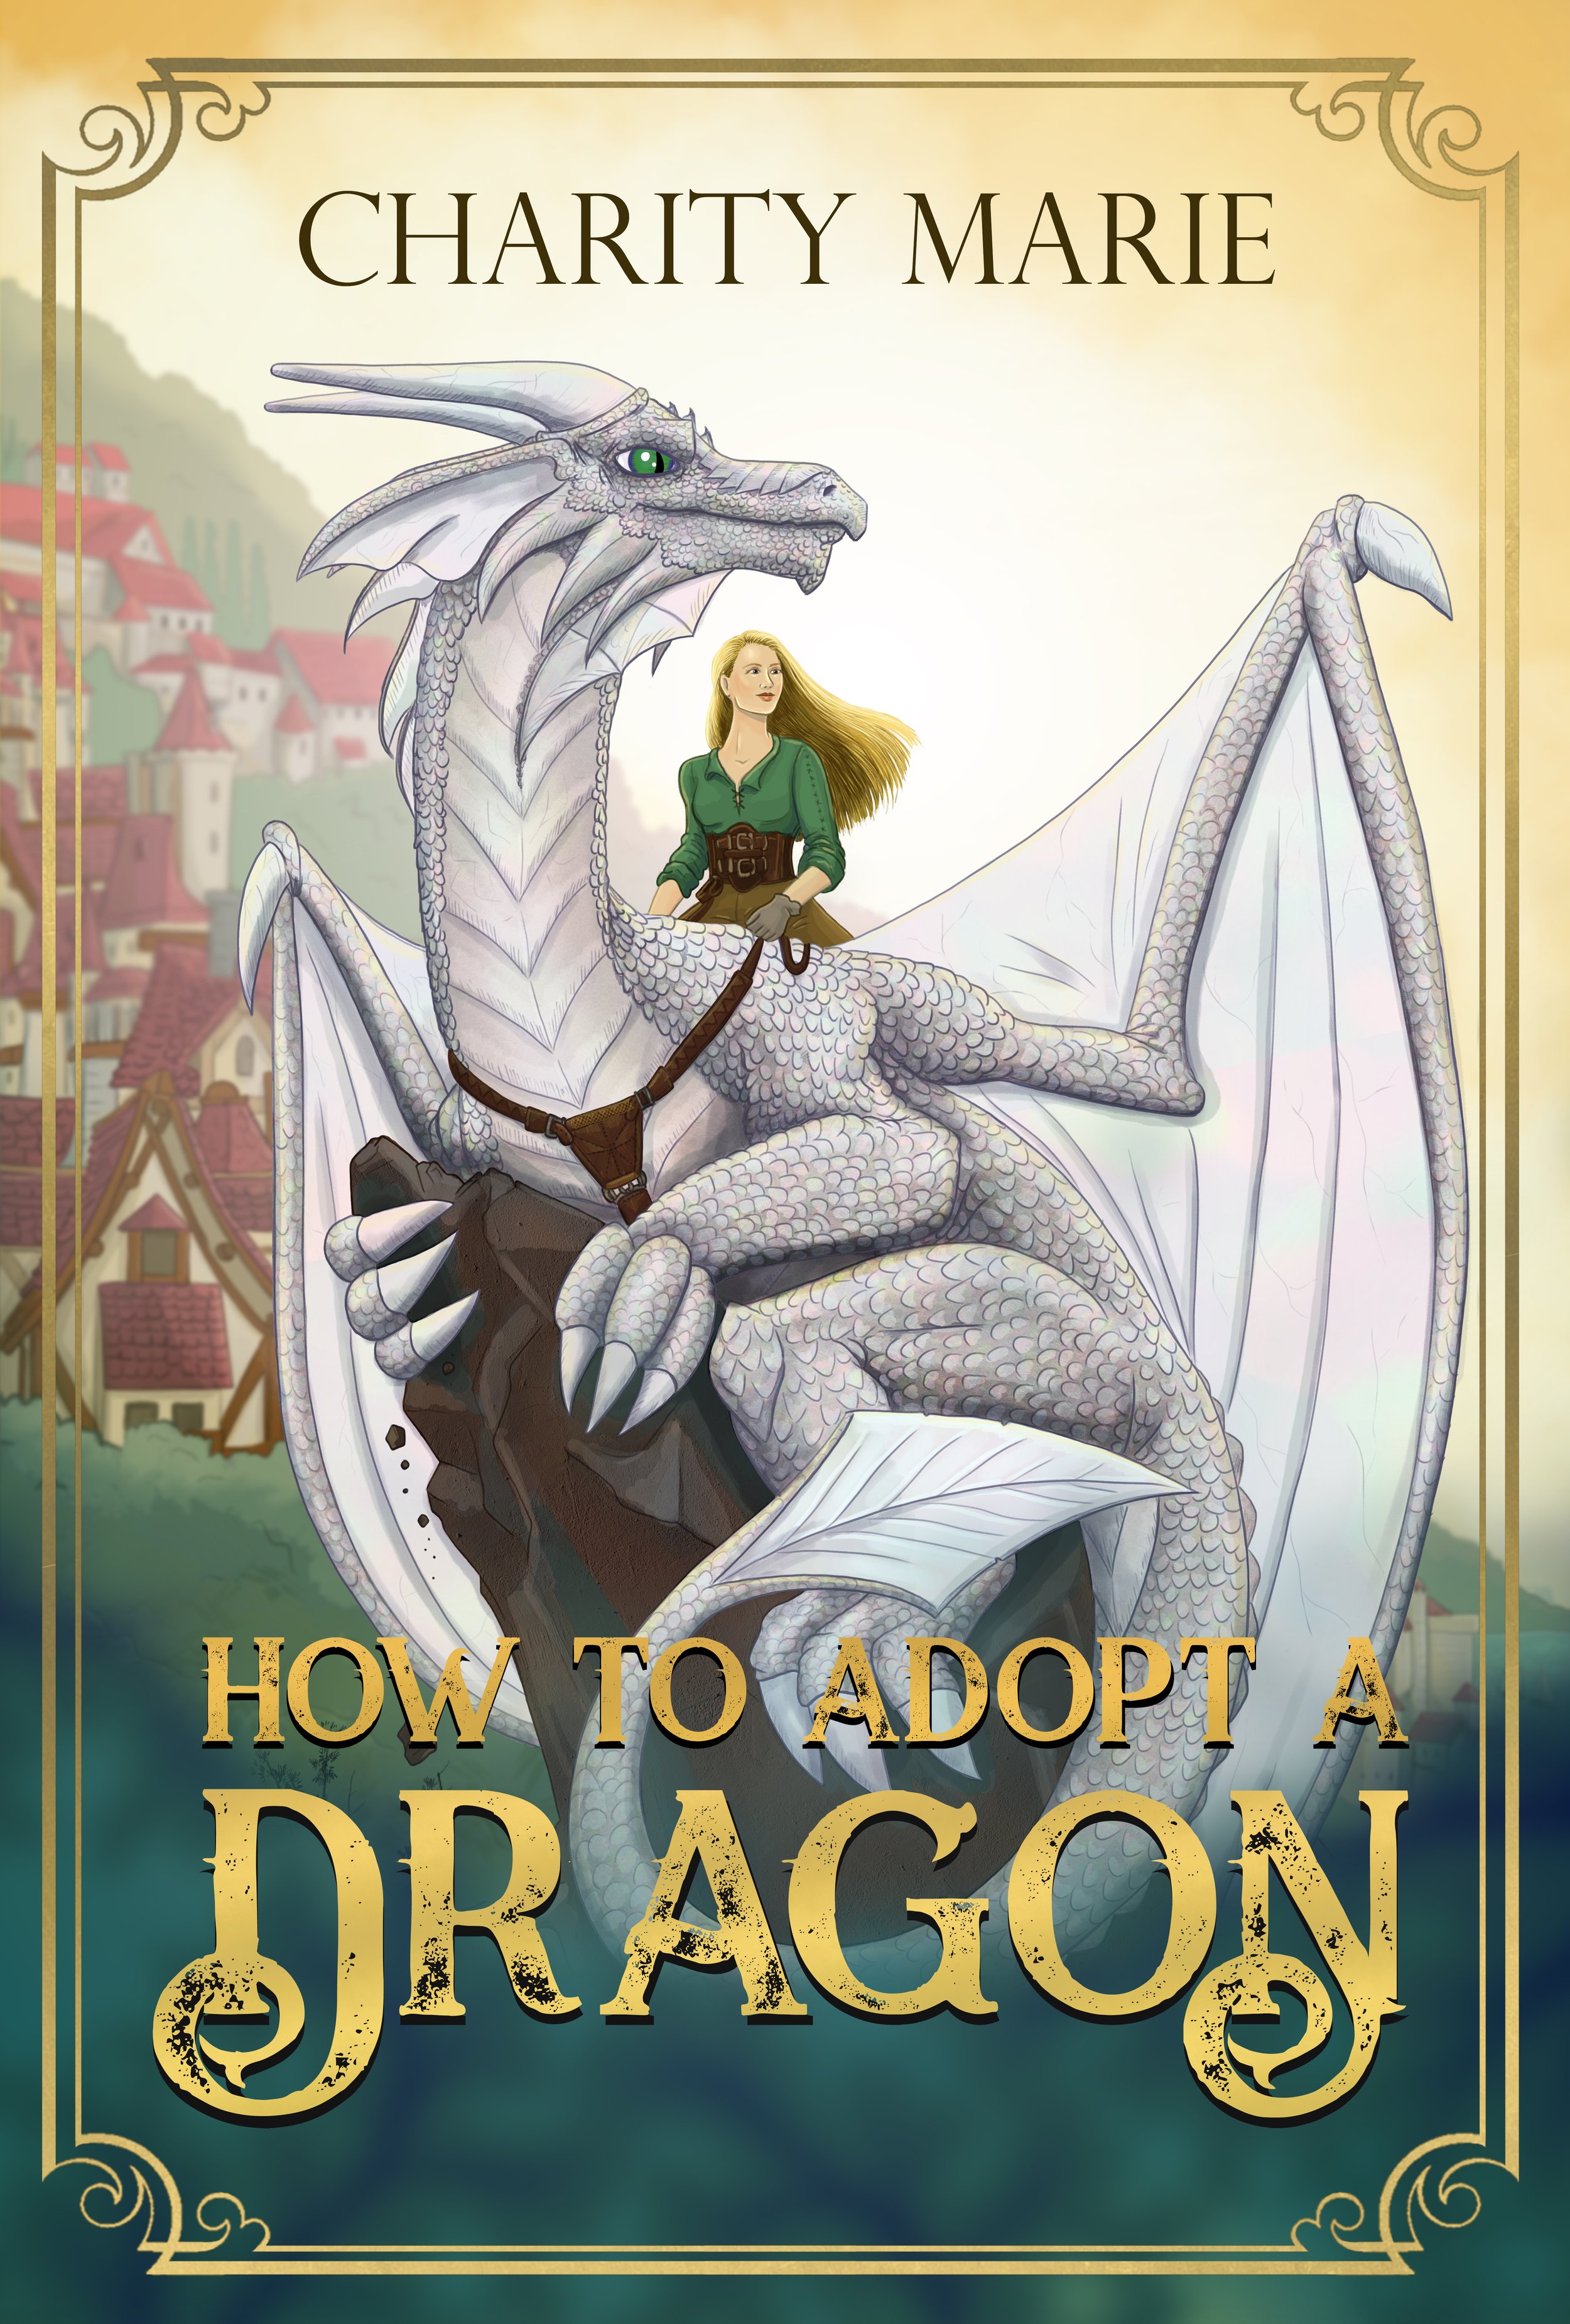 How to Adopt a Dragon.jpg